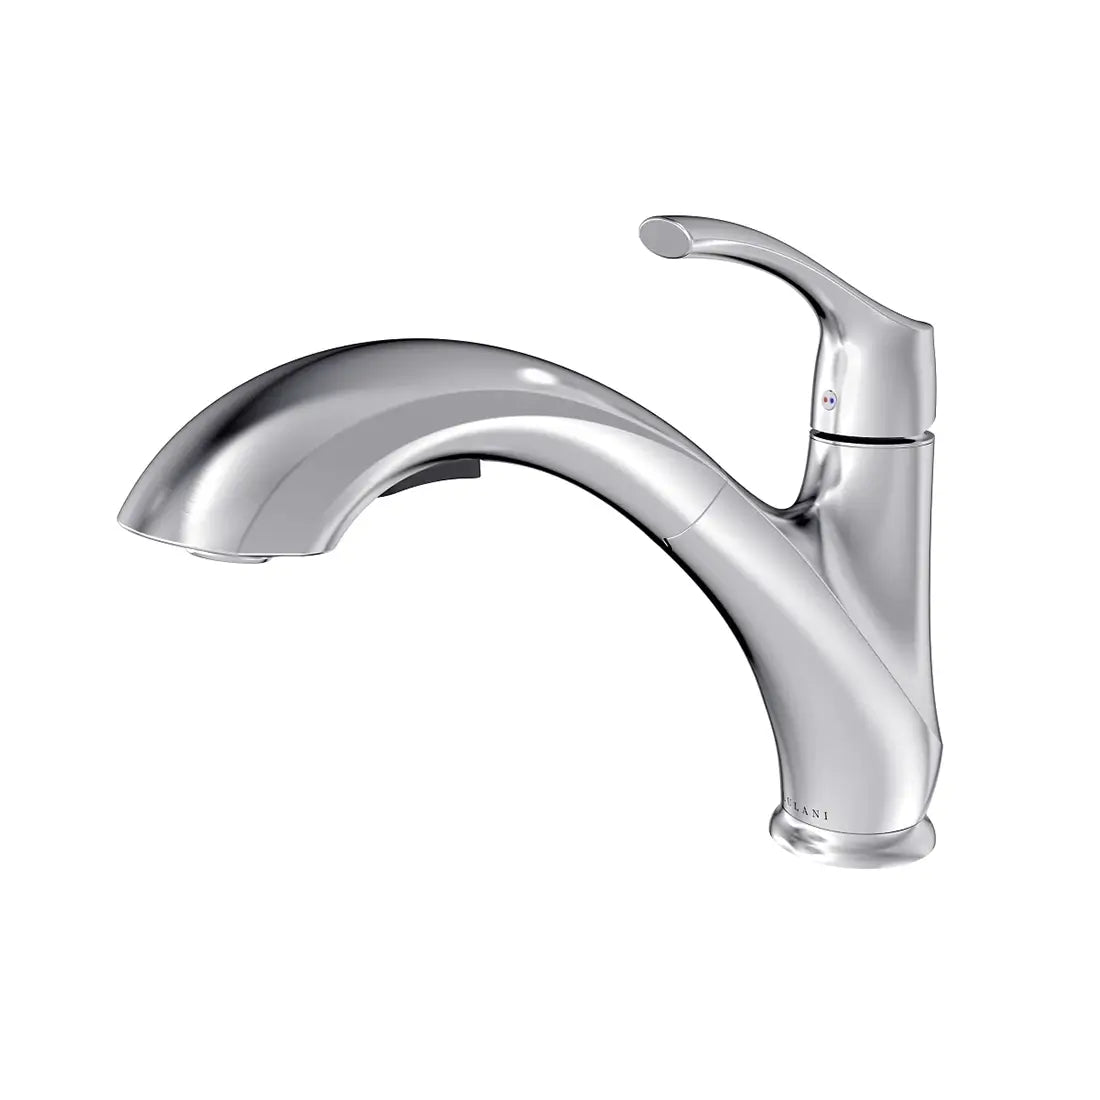 Open Box - Maldives, Low Profile Pull-Out Kitchen Faucet